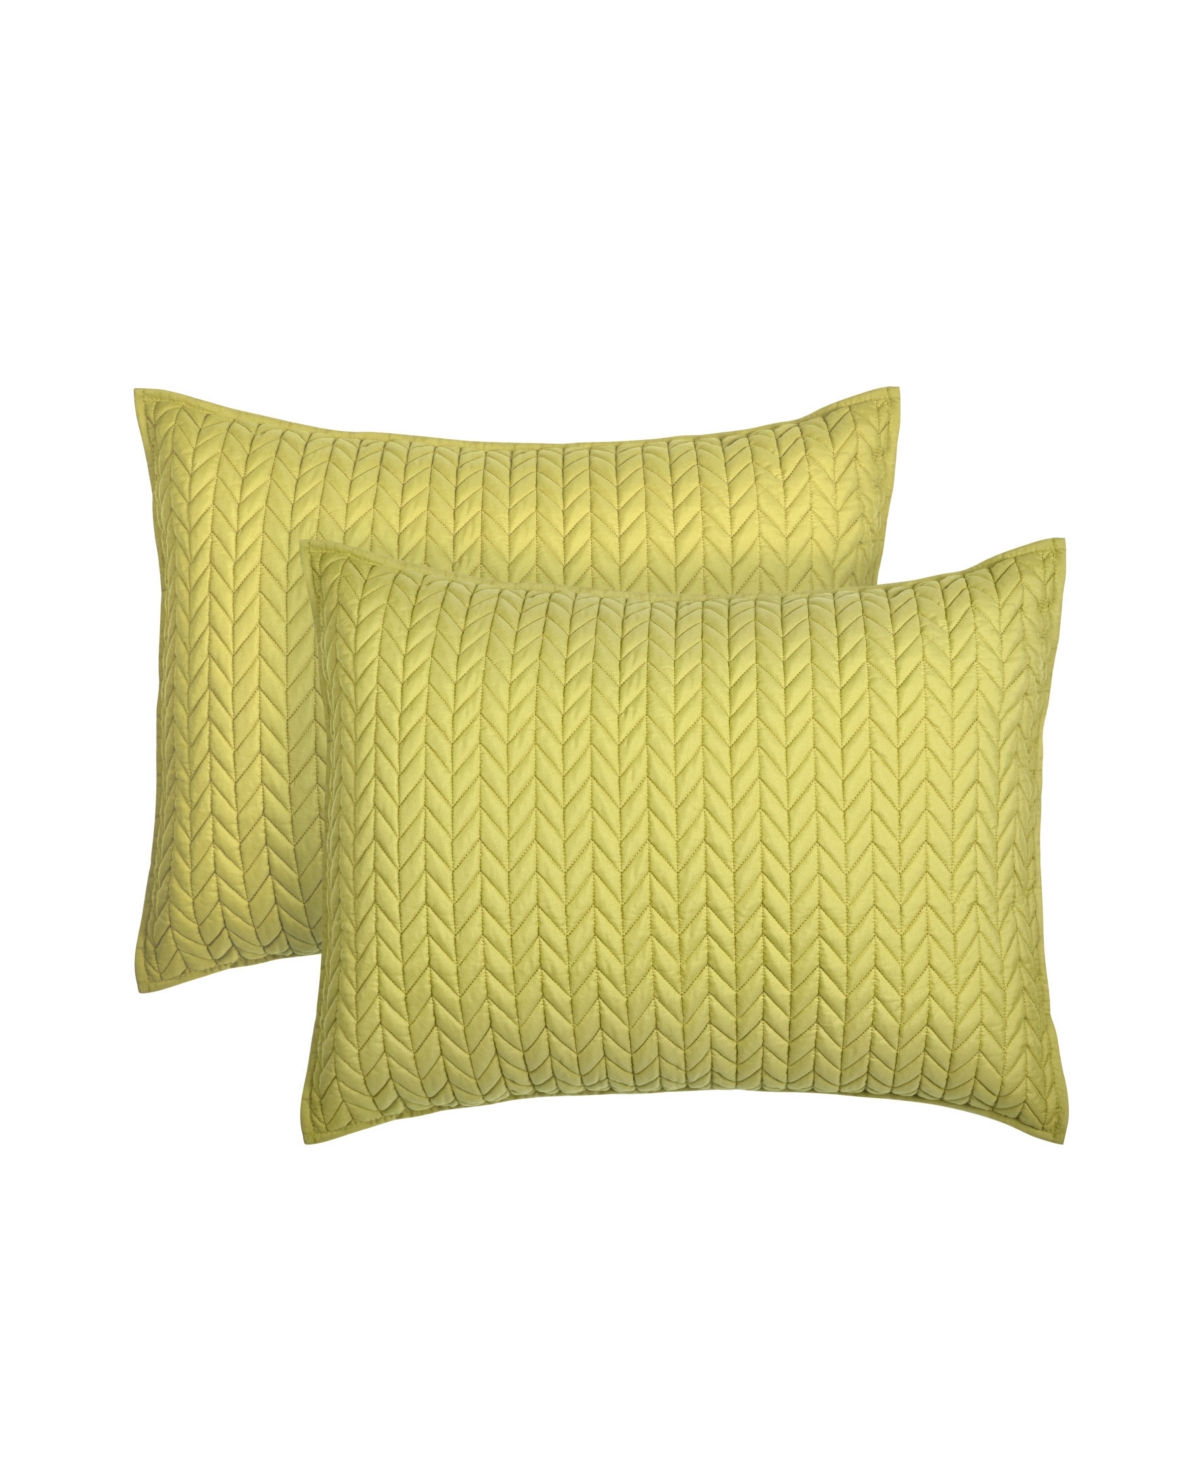 Cayman Quilted Sham, King - Chartreuse